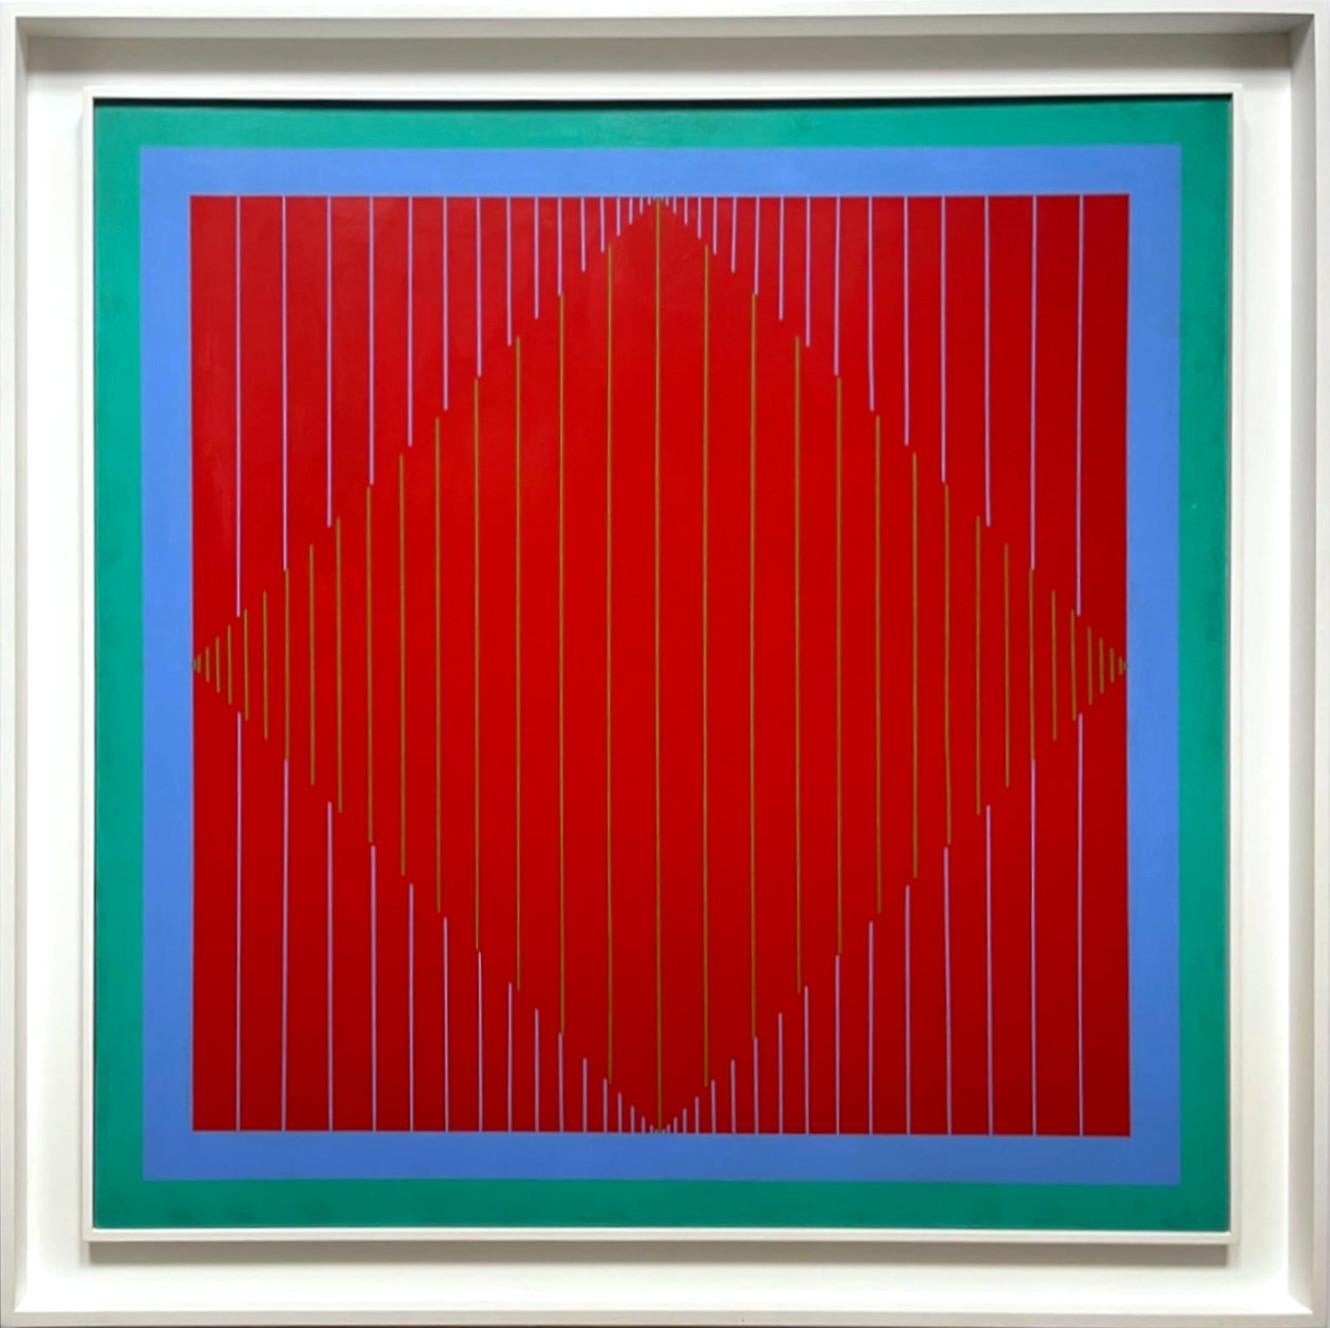 Metallic Water, coveted 1960s Op Art painting shown at Art Institute of Chicago